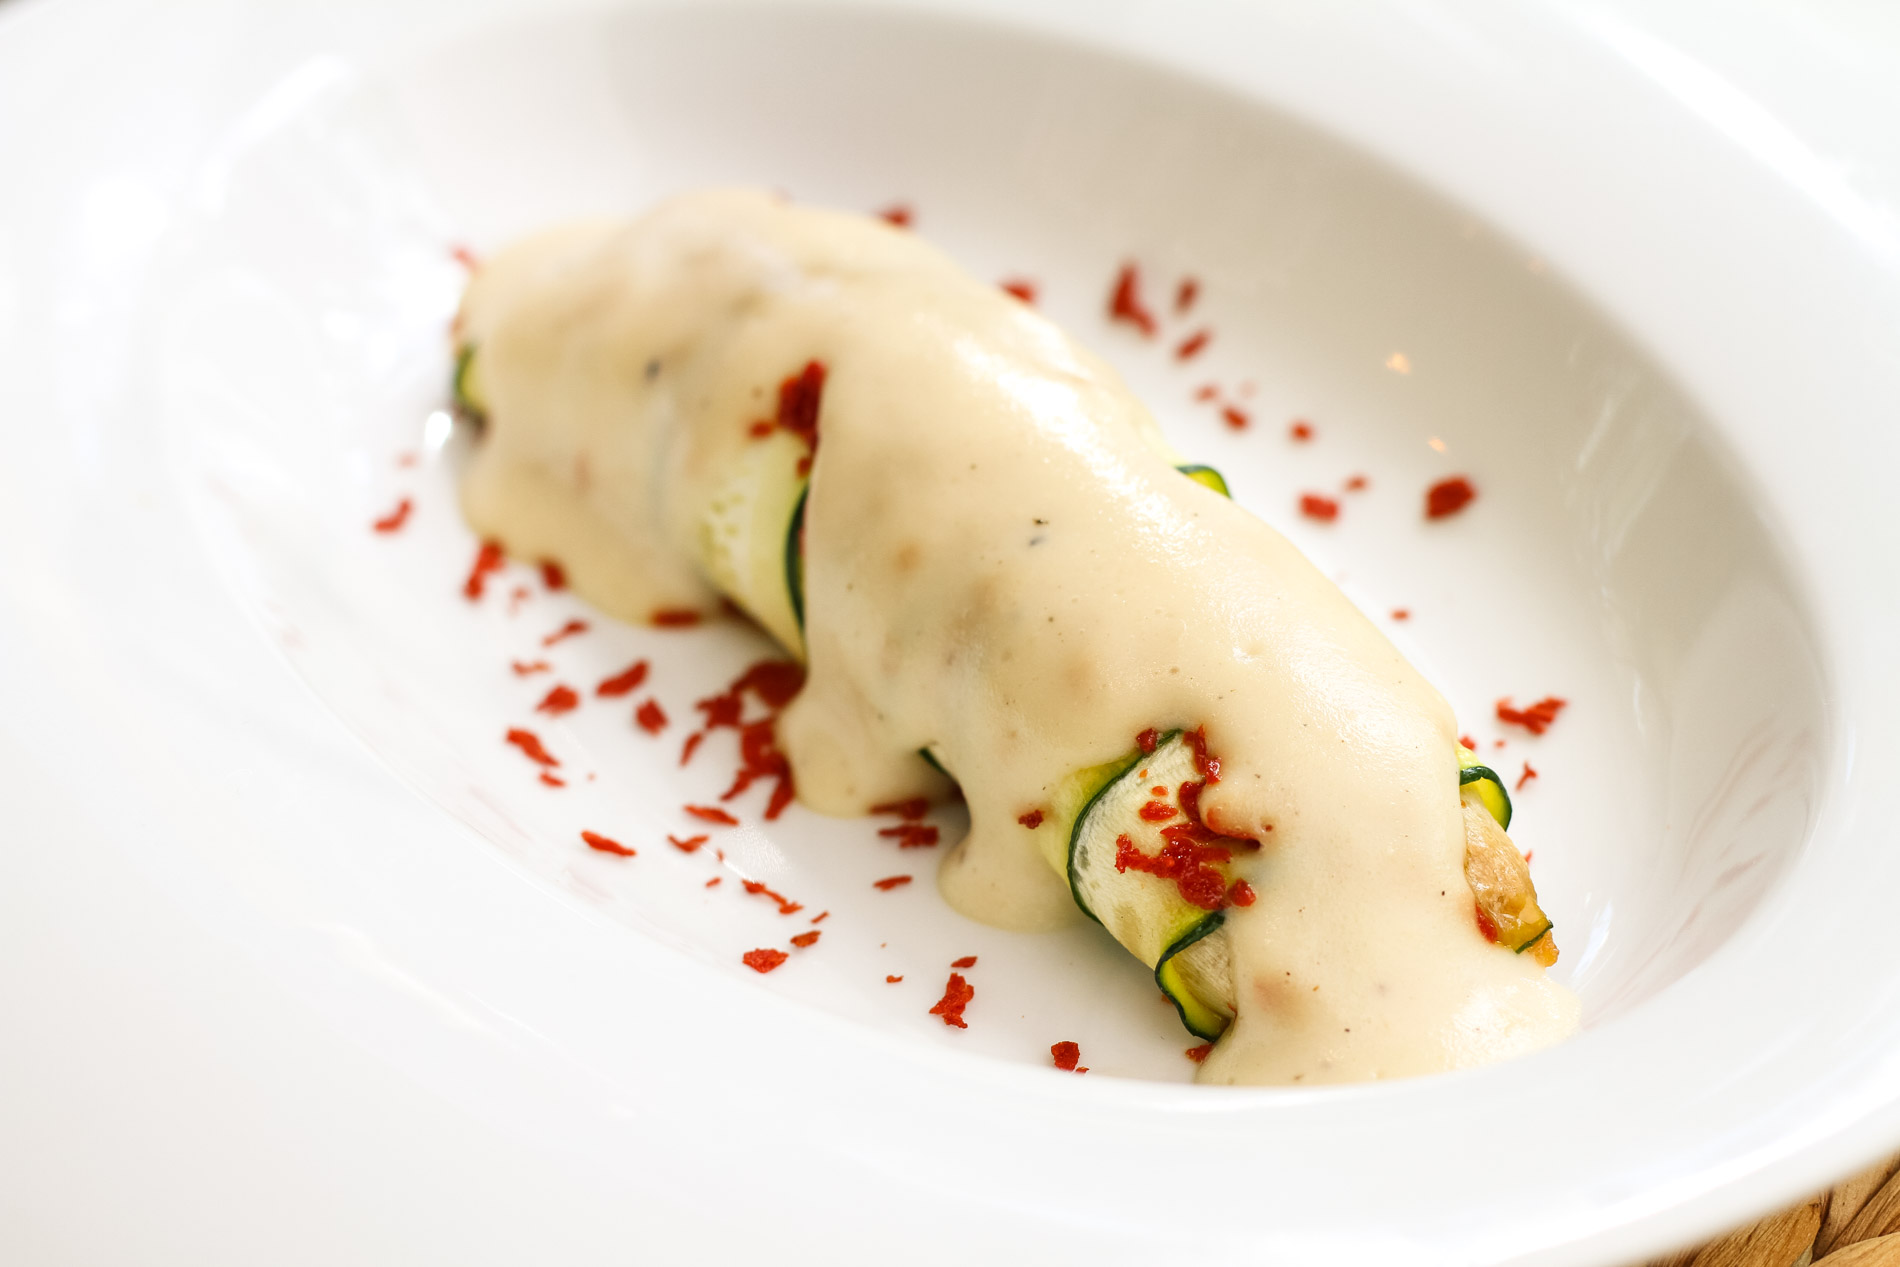 Zucchini cannelloni stuffed with vegan bolognese